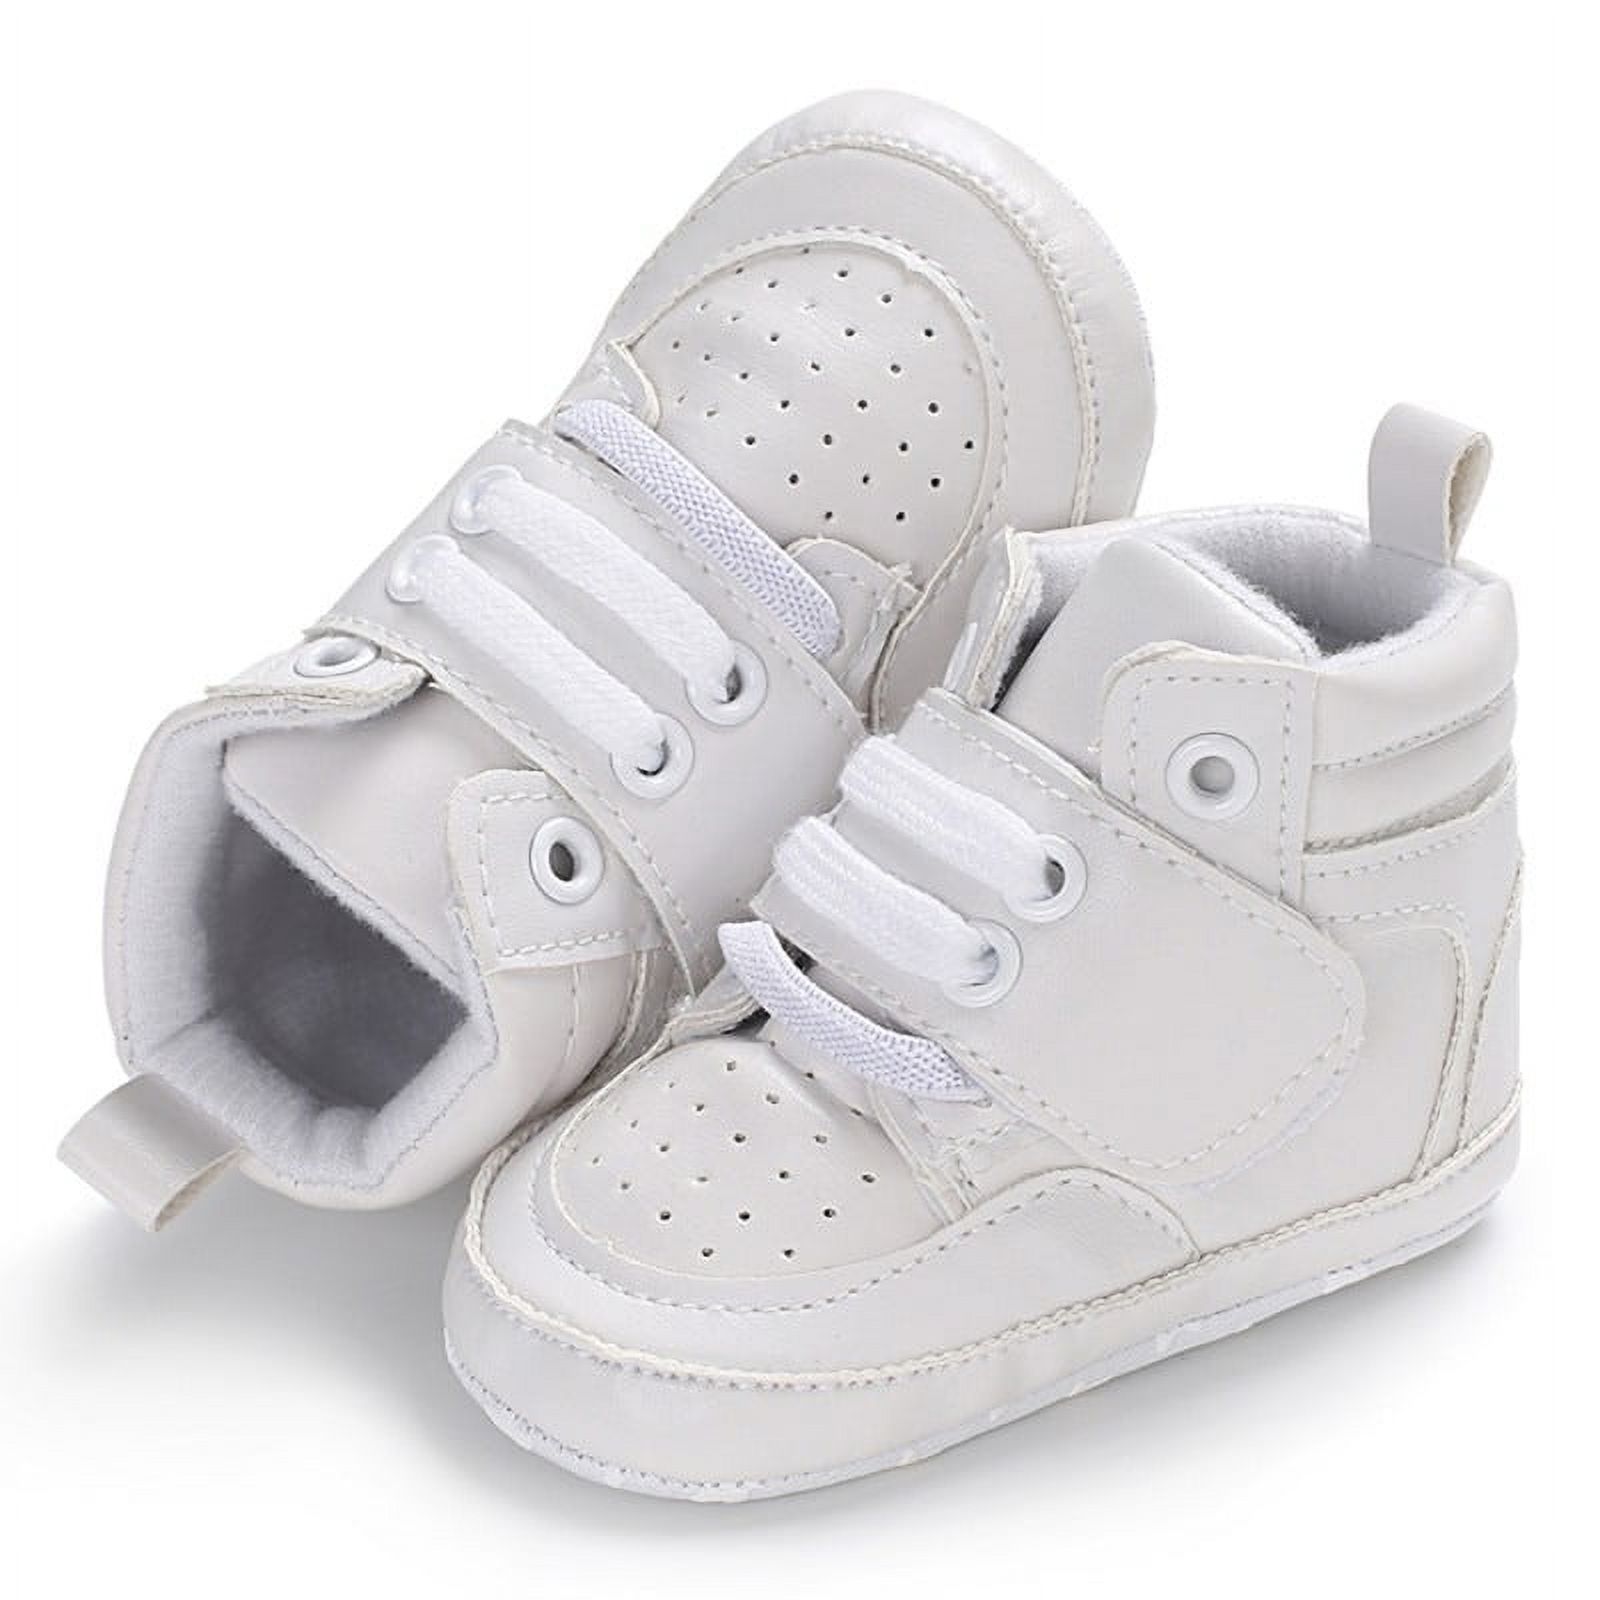 zhongxinda 0-18M Newly Fashion First Walkers Baby Boys Casual Shoes Infant Newborn Kids Soft Toddler Shoes Baby Shoes - image 5 of 6